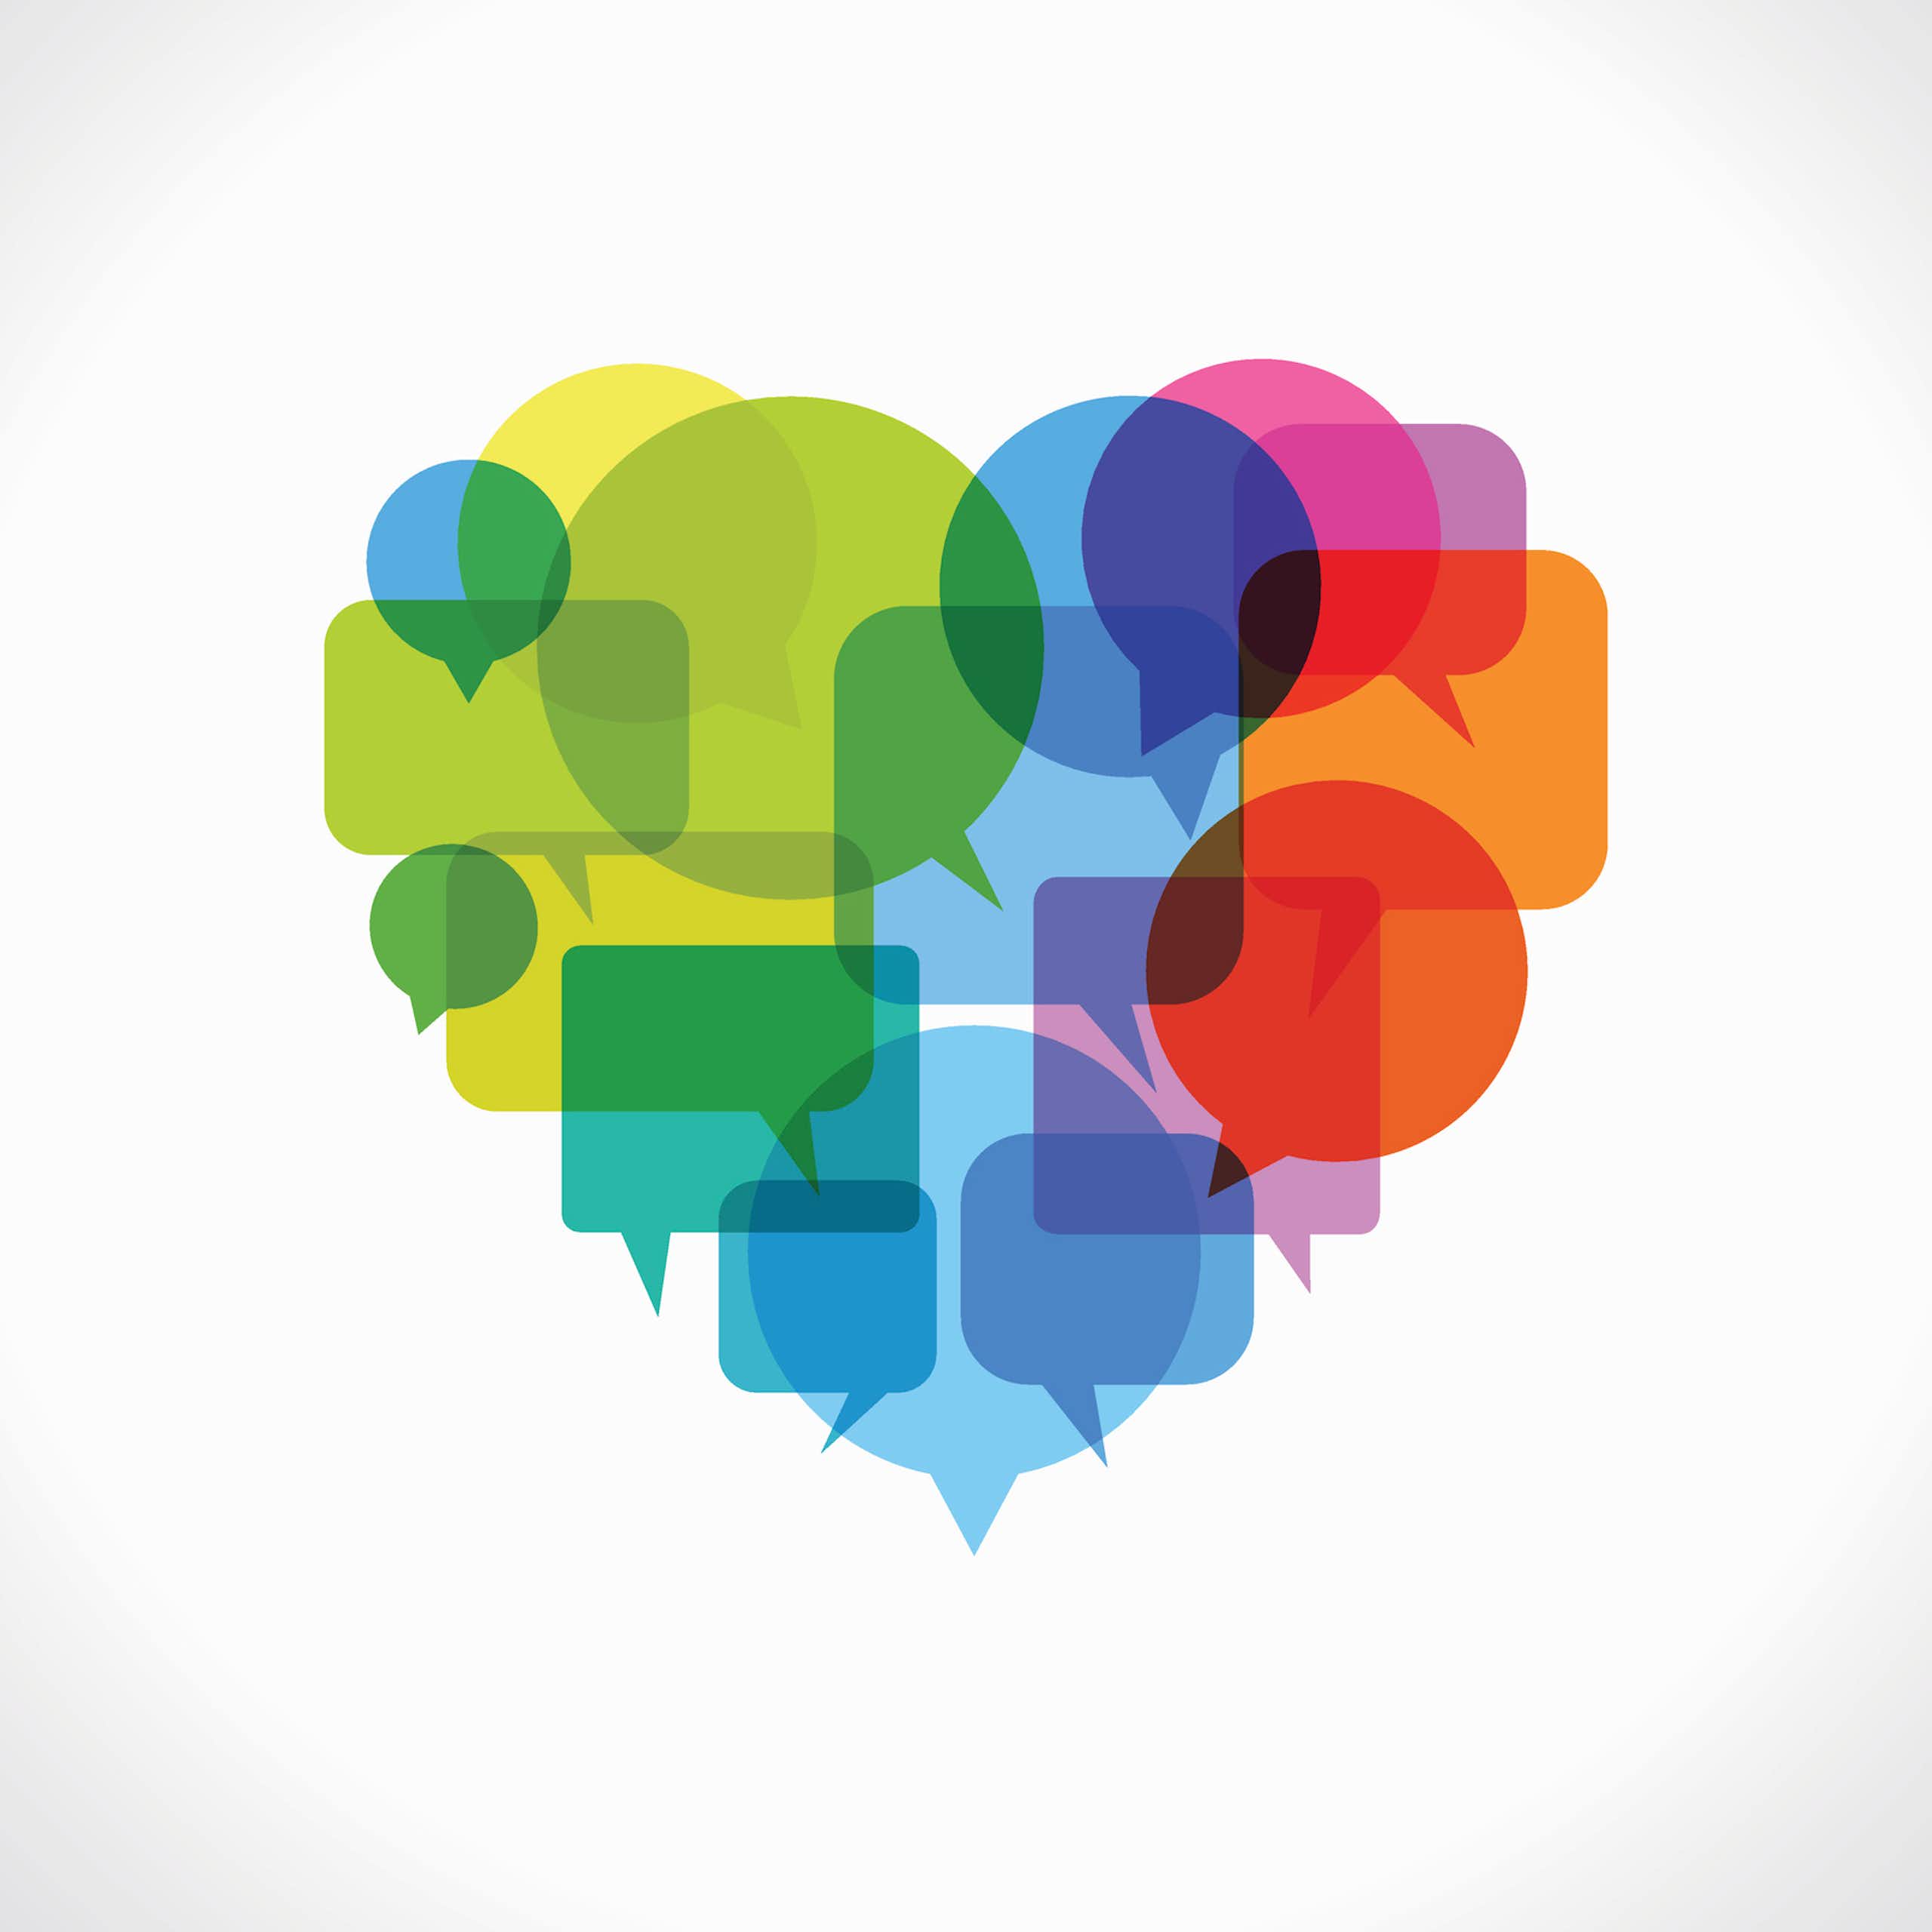 Illustration of heart composed of multicolored, overlapping speech bubbles